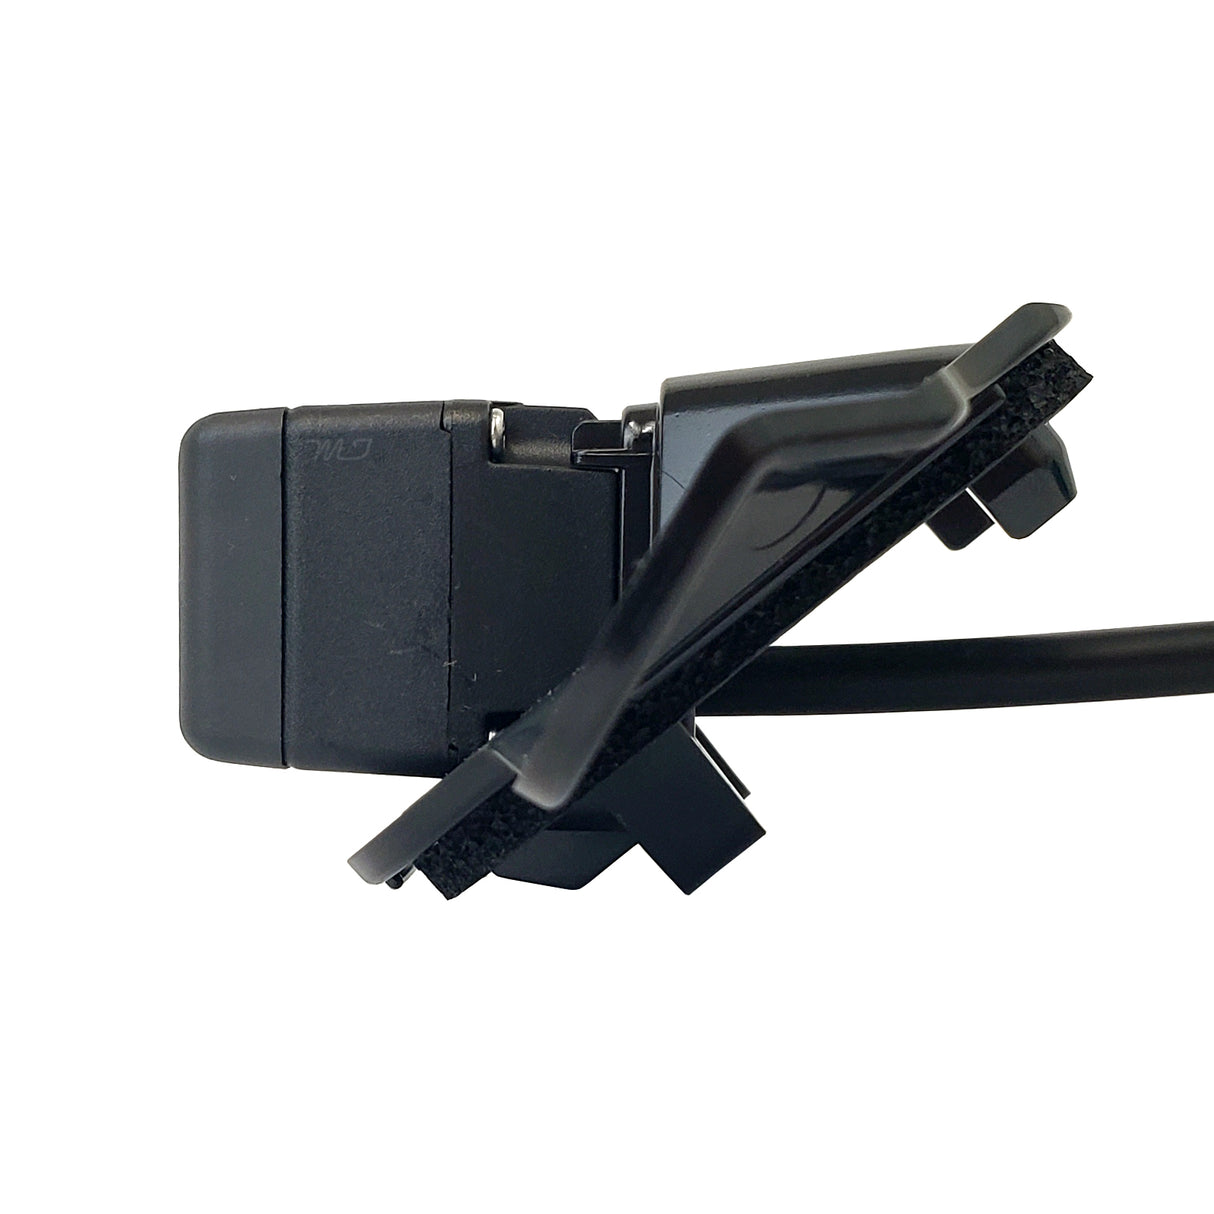 Lexus IS 200t (2016), 250 (2014-2015),300 (2016-2018), 350 (2014-2018) OEM Replacement Backup Camera OE Part # 86790-53040